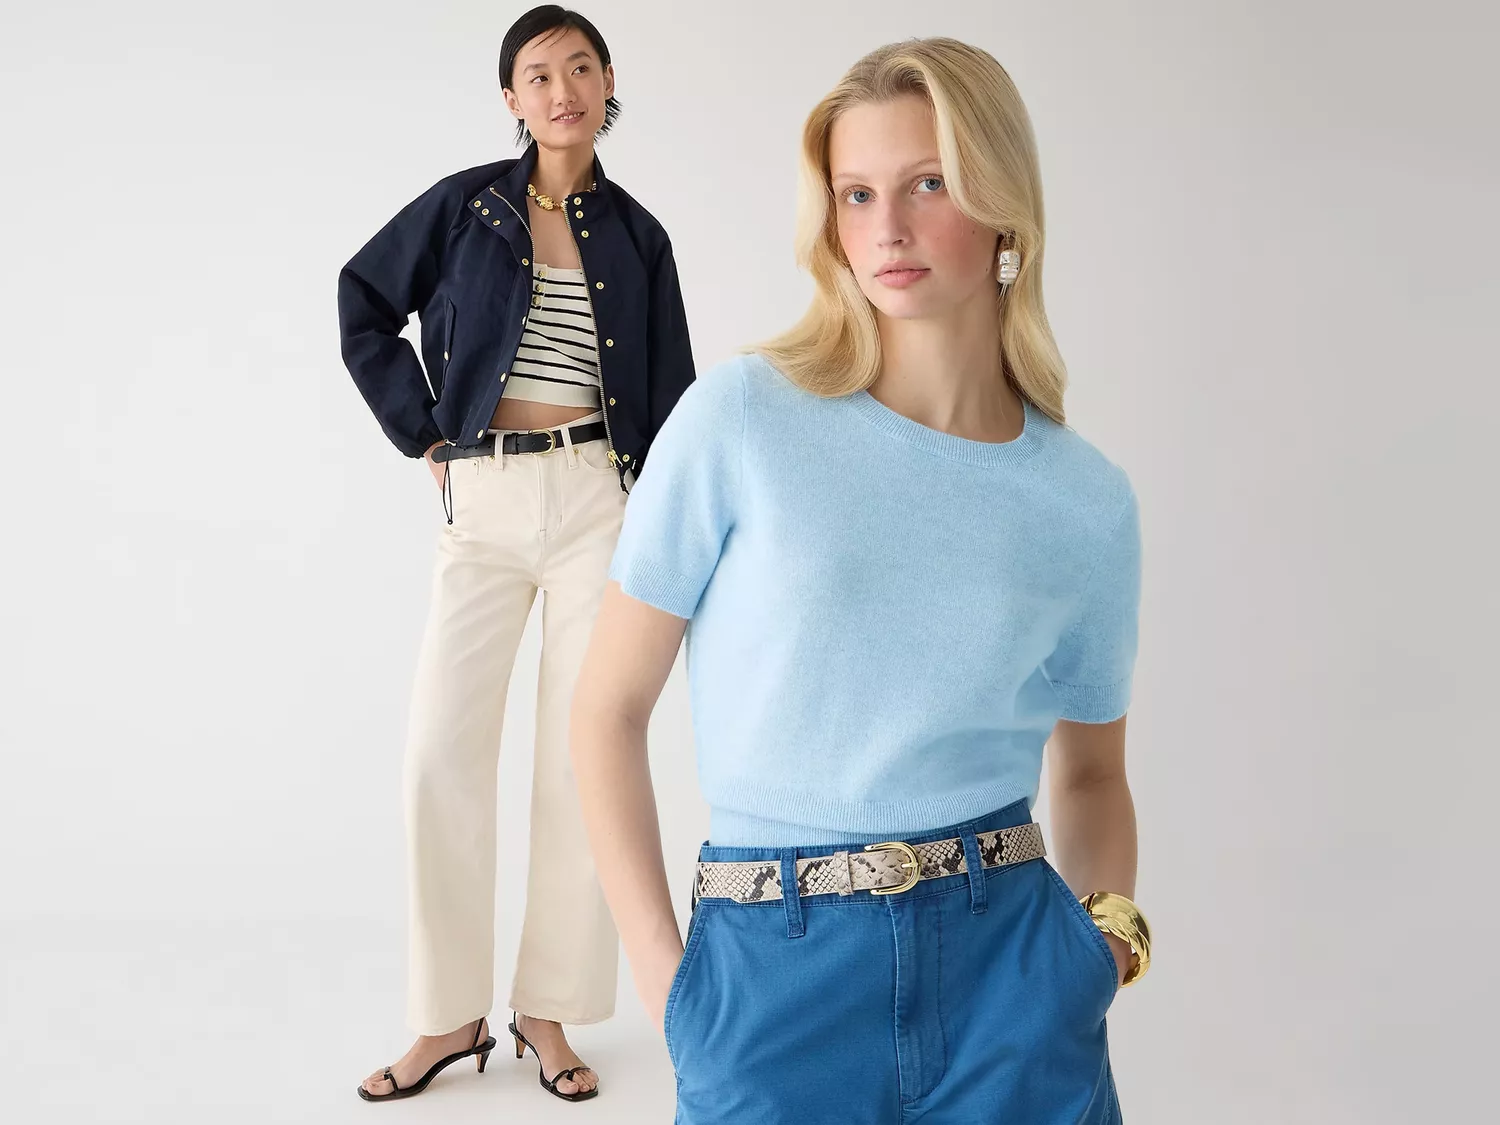 J.Crew Dropped 500+ Spring-Ready Styles, and I’m Buying These 5 to Revamp My Wardrobe